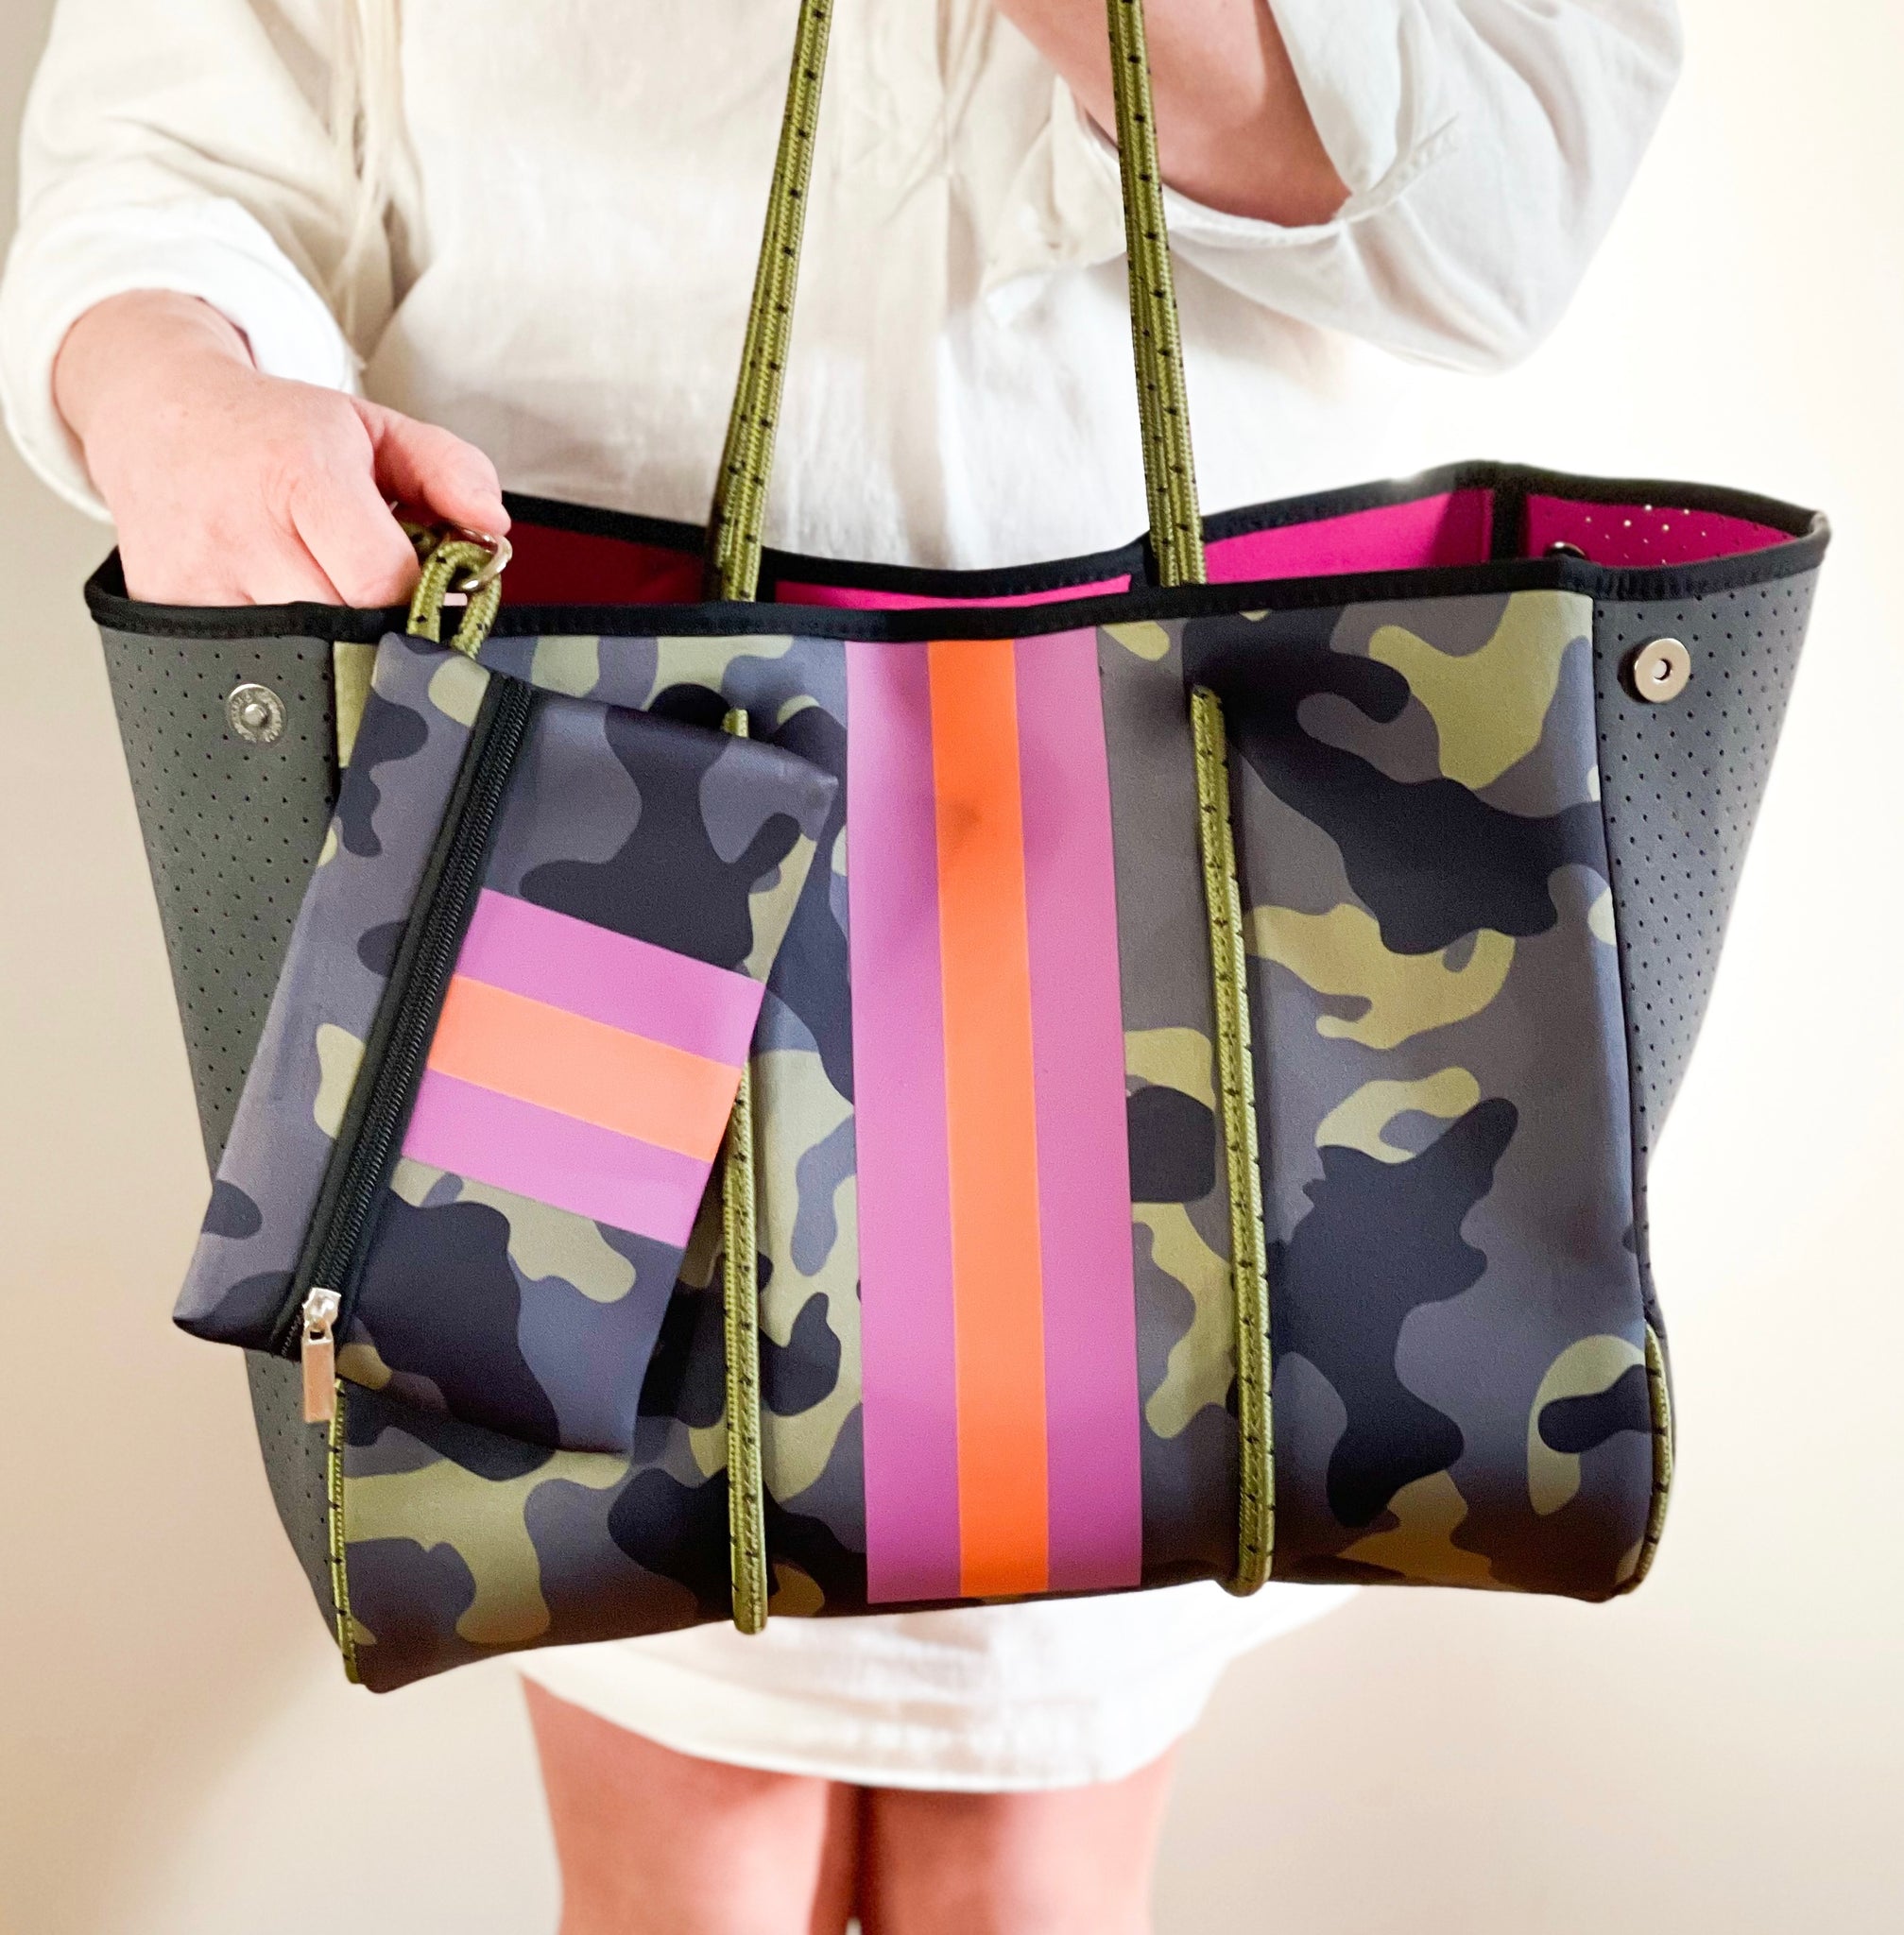 The Aniella Neoprene Tote - Green Camo with Red Racer Stripe – Babs+Birdie